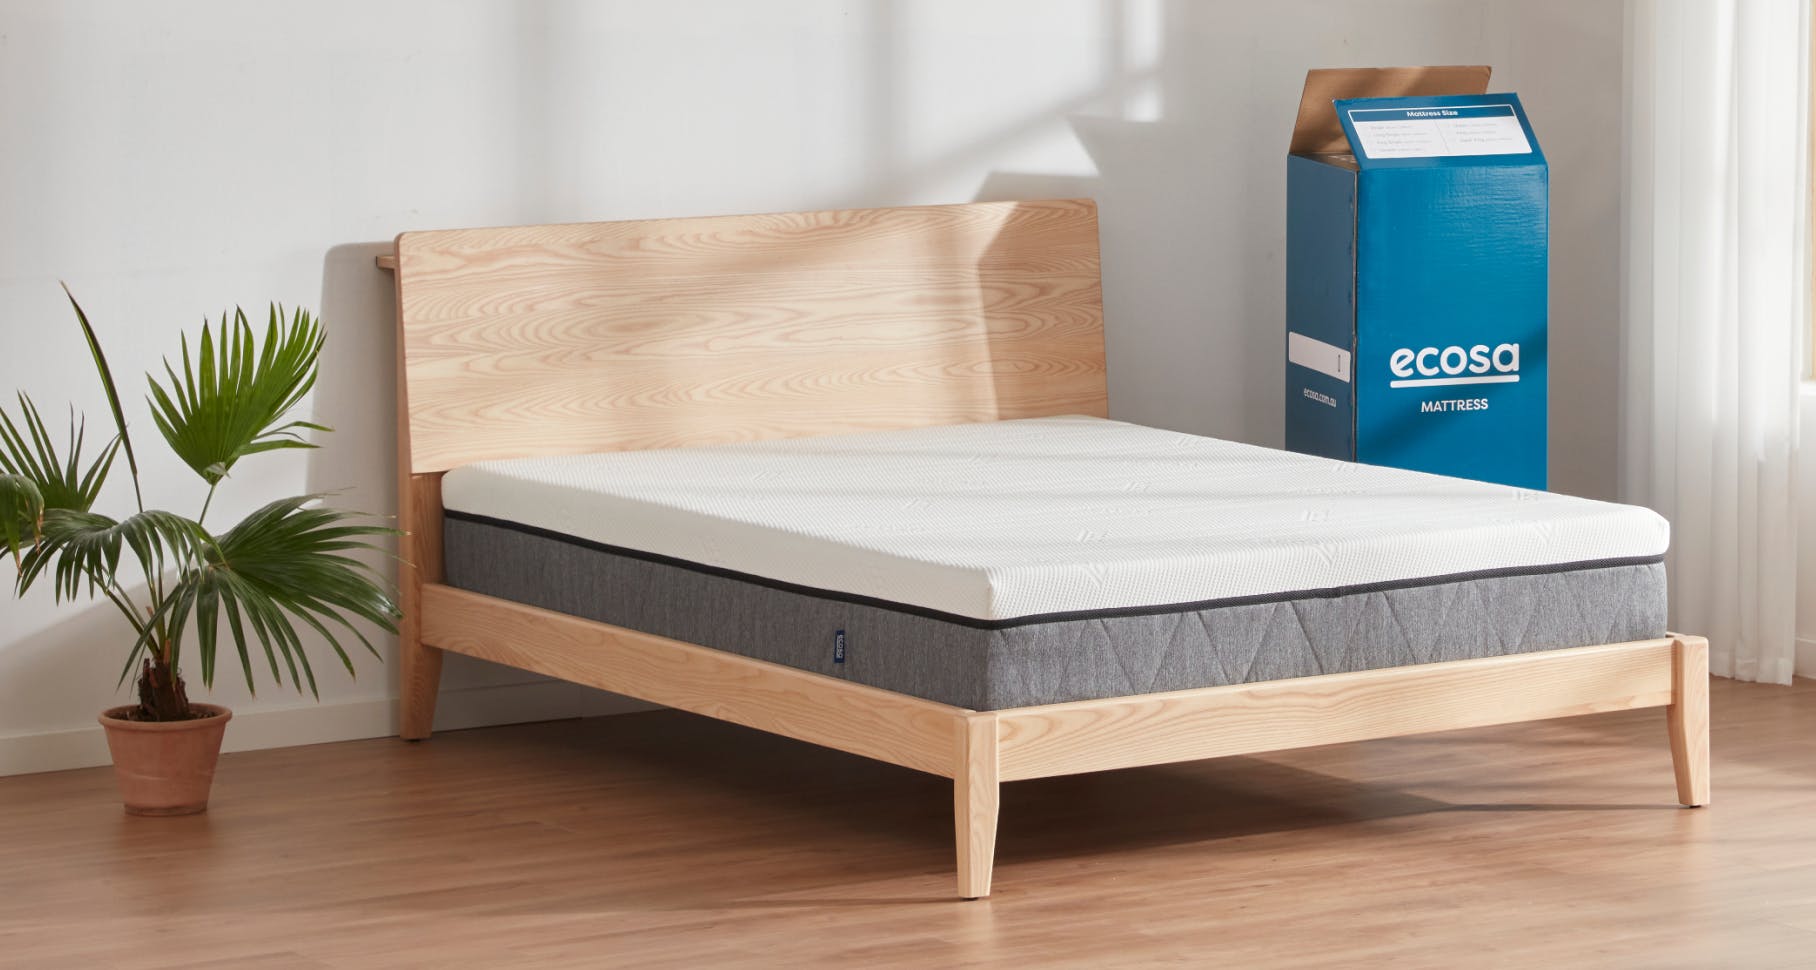 FREE Queen-sized bed (mattress, frame, and set of risers) - free